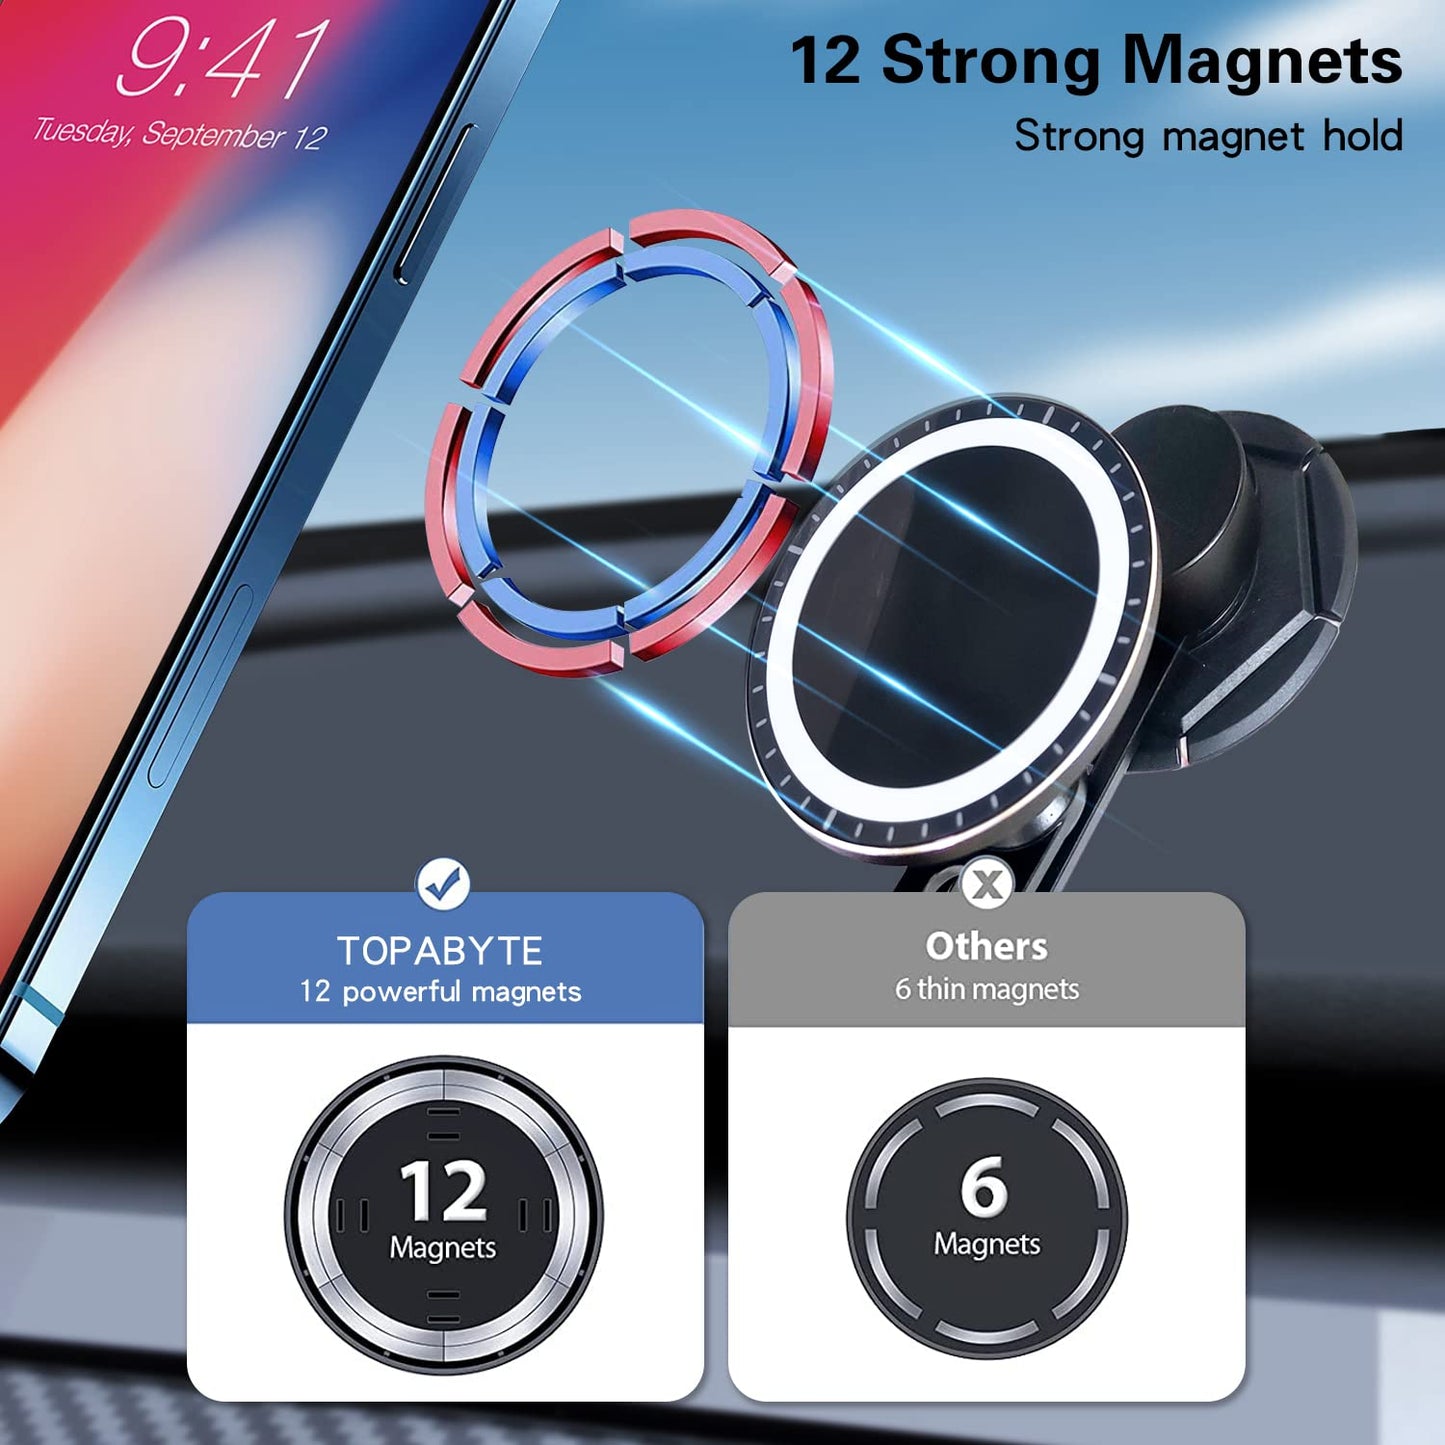 TOPABYTE Magnetic Phone Mount with MagSafe for Model 3/Y/S/X Cybertruck Invisible Foldaway Design for Screen